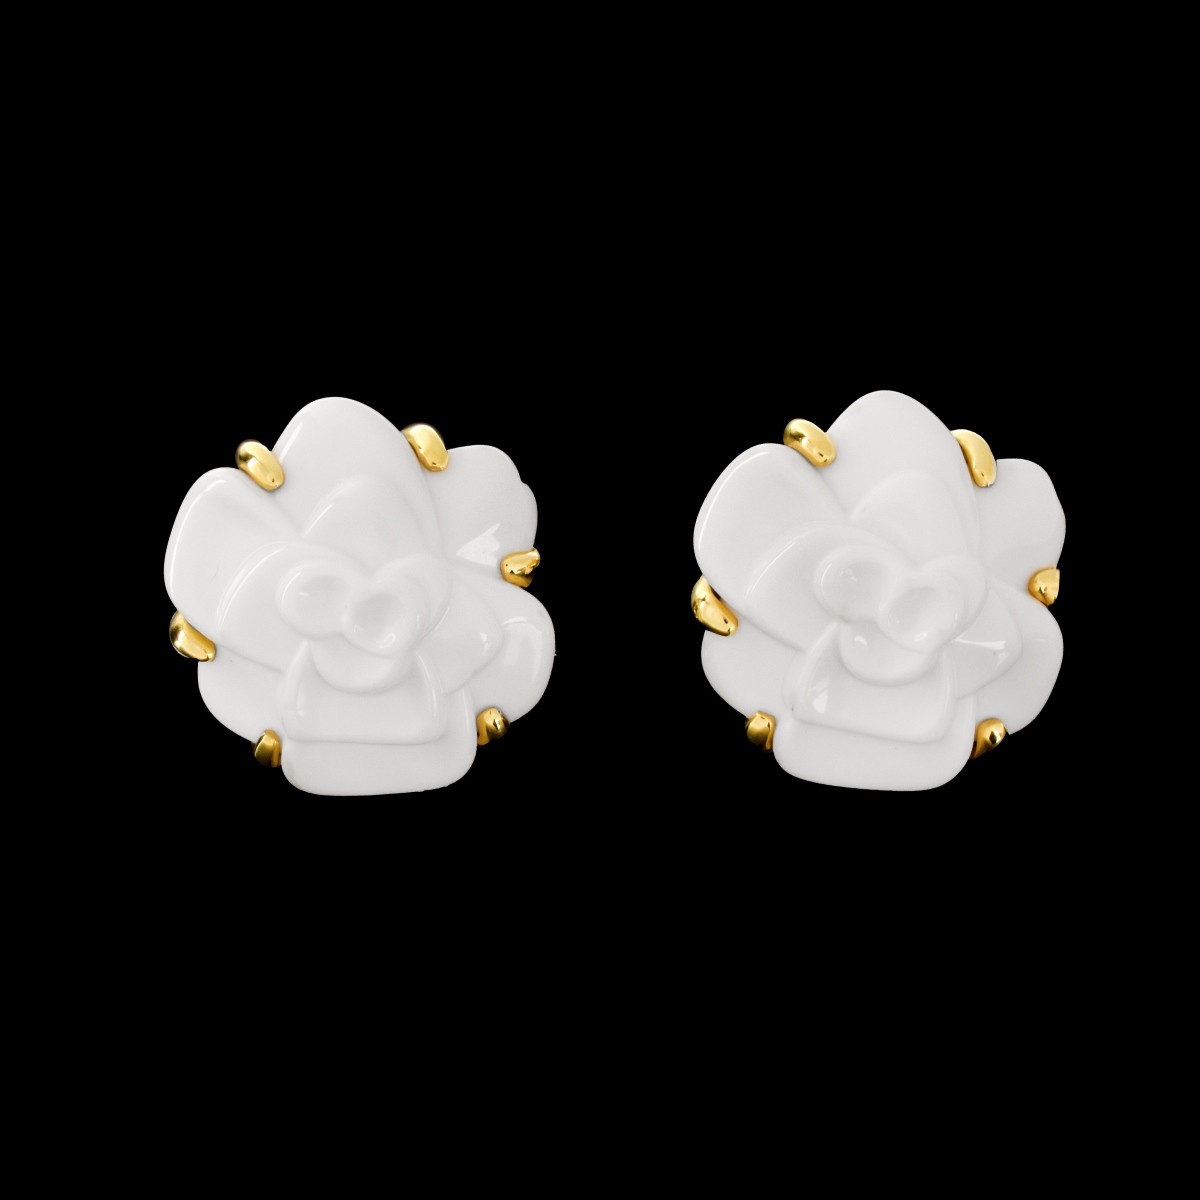 Chanel Agate and 18K Earrings